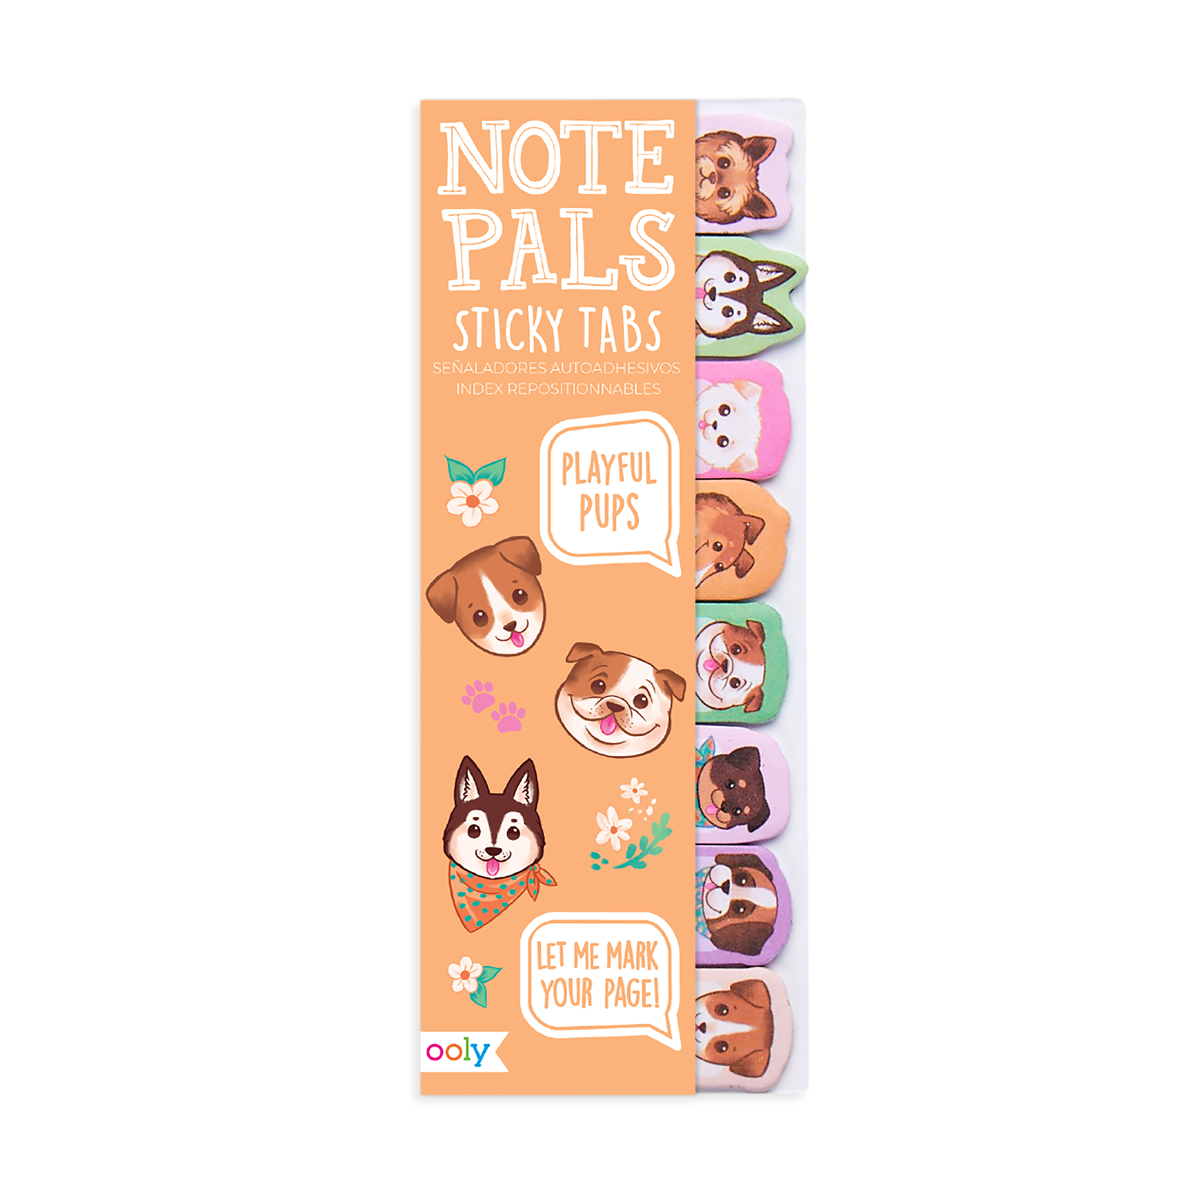 OOLY Note Pals Sticky Tabs - Playful Pups in packaging